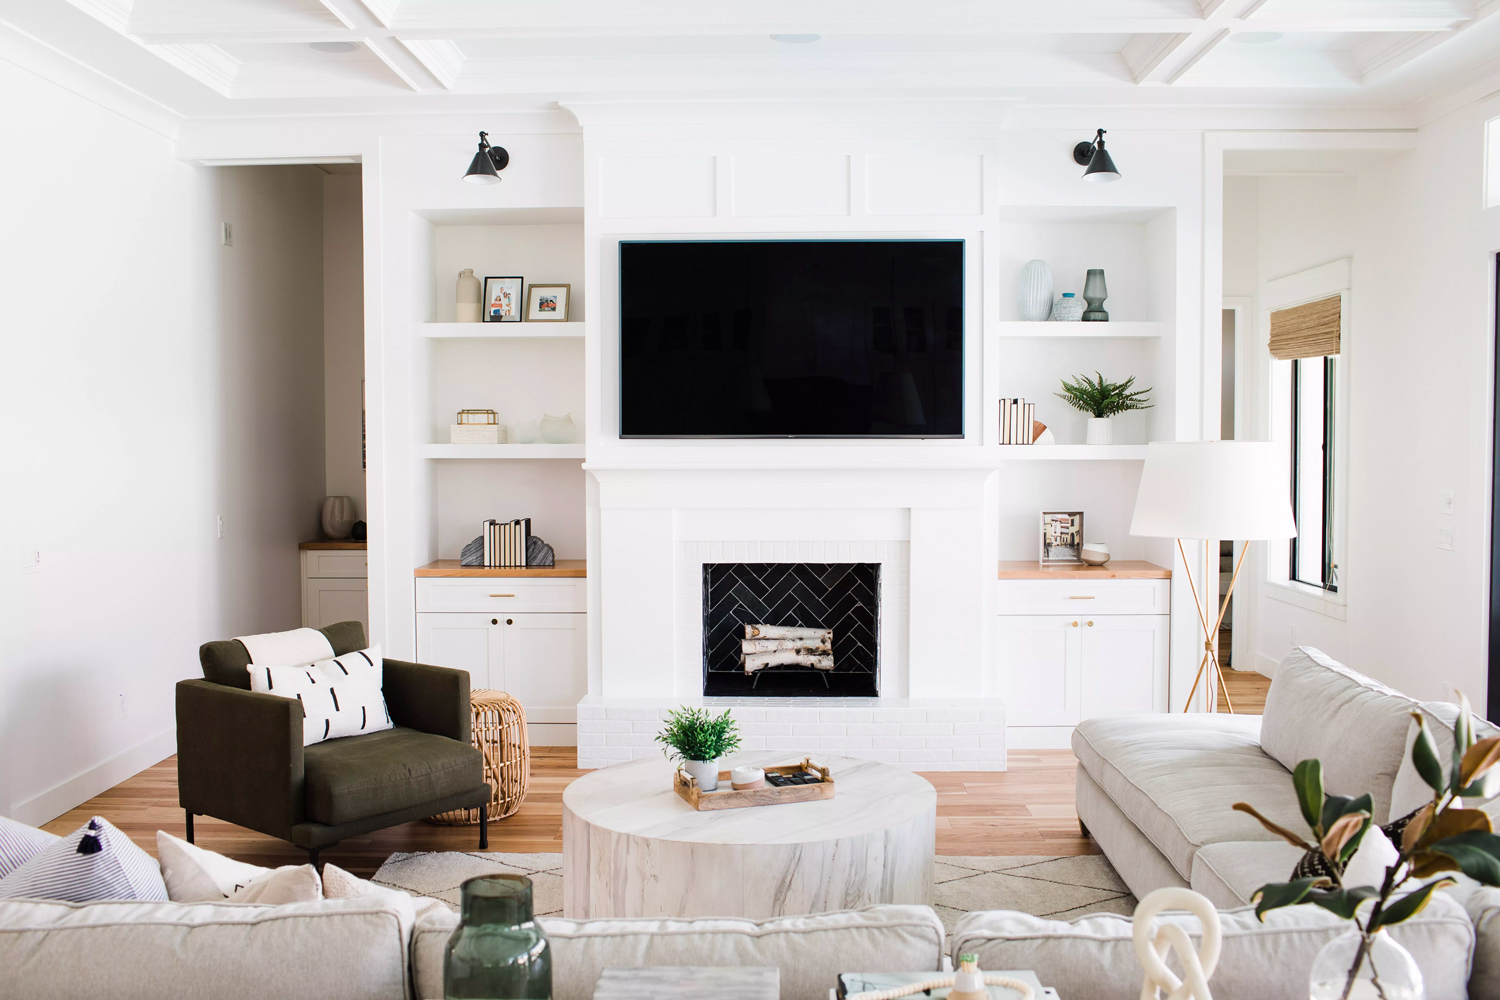 The Coziest Home with a Black Herringbone Fireplace